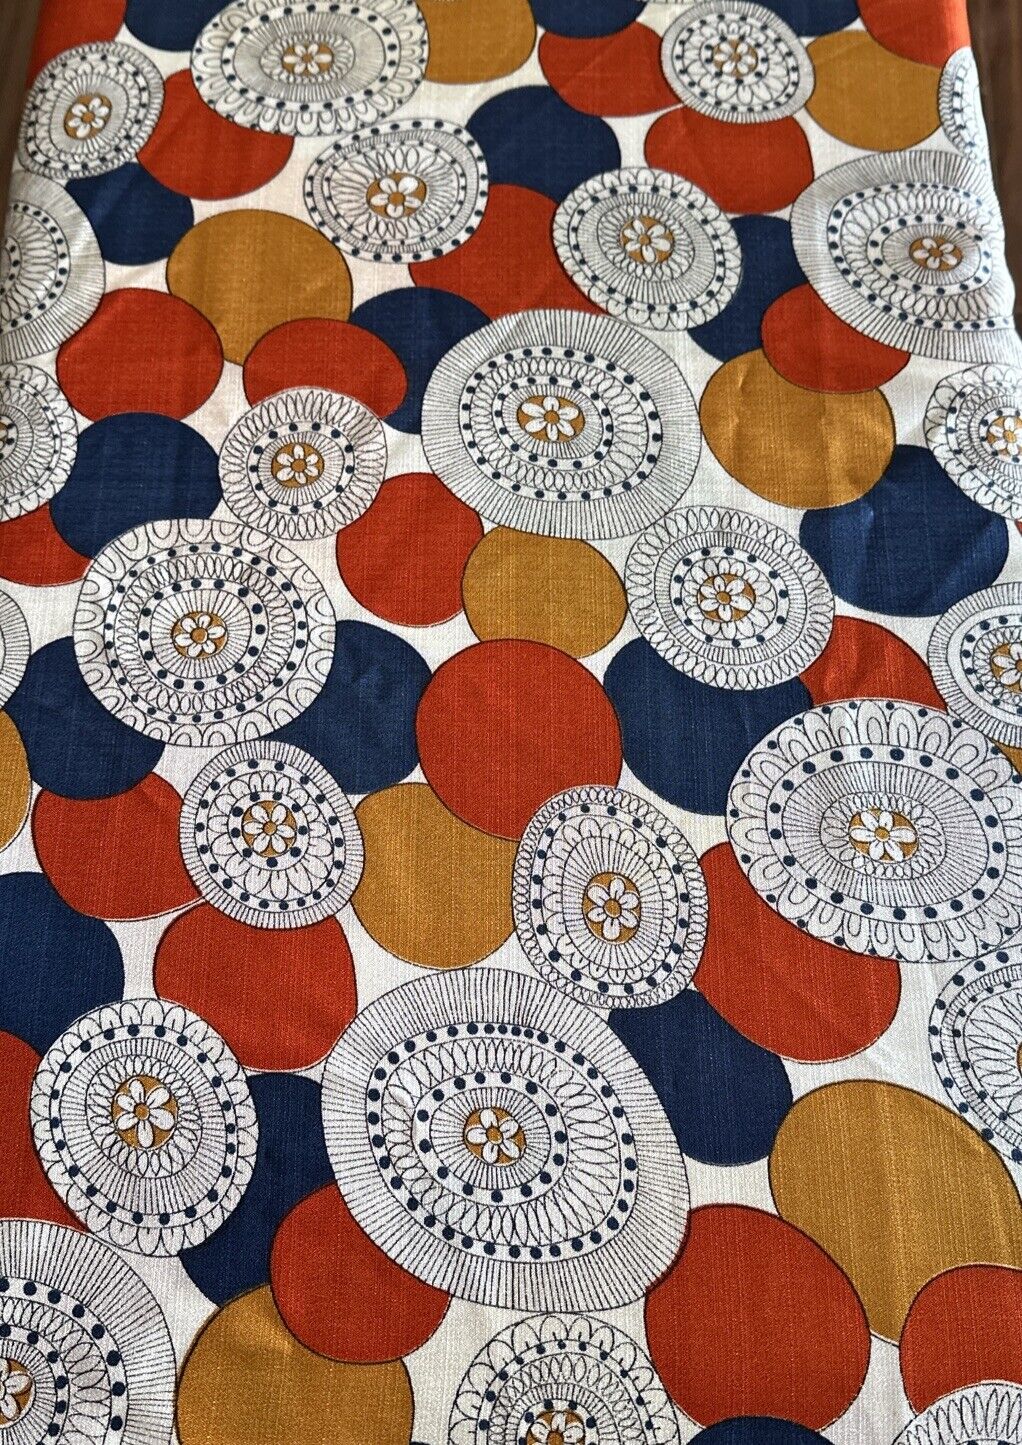 Vtg Exquisite Japanese Silk Fabric W45”xL3Y Daisies Red White Gold Blue Circles